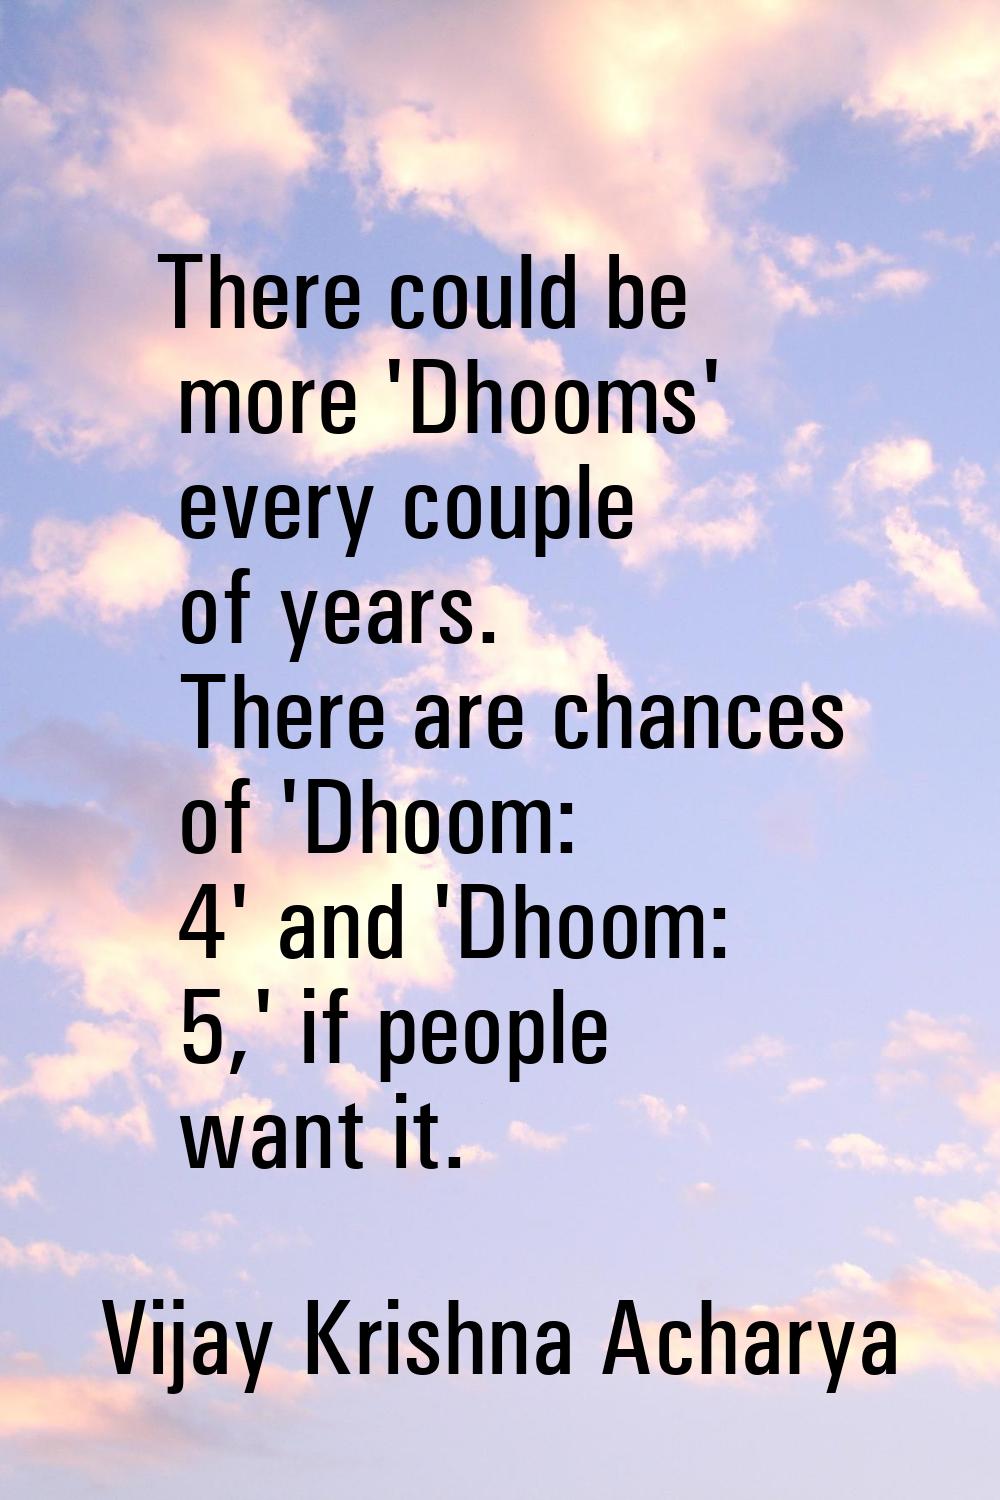 There could be more 'Dhooms' every couple of years. There are chances of 'Dhoom: 4' and 'Dhoom: 5,'